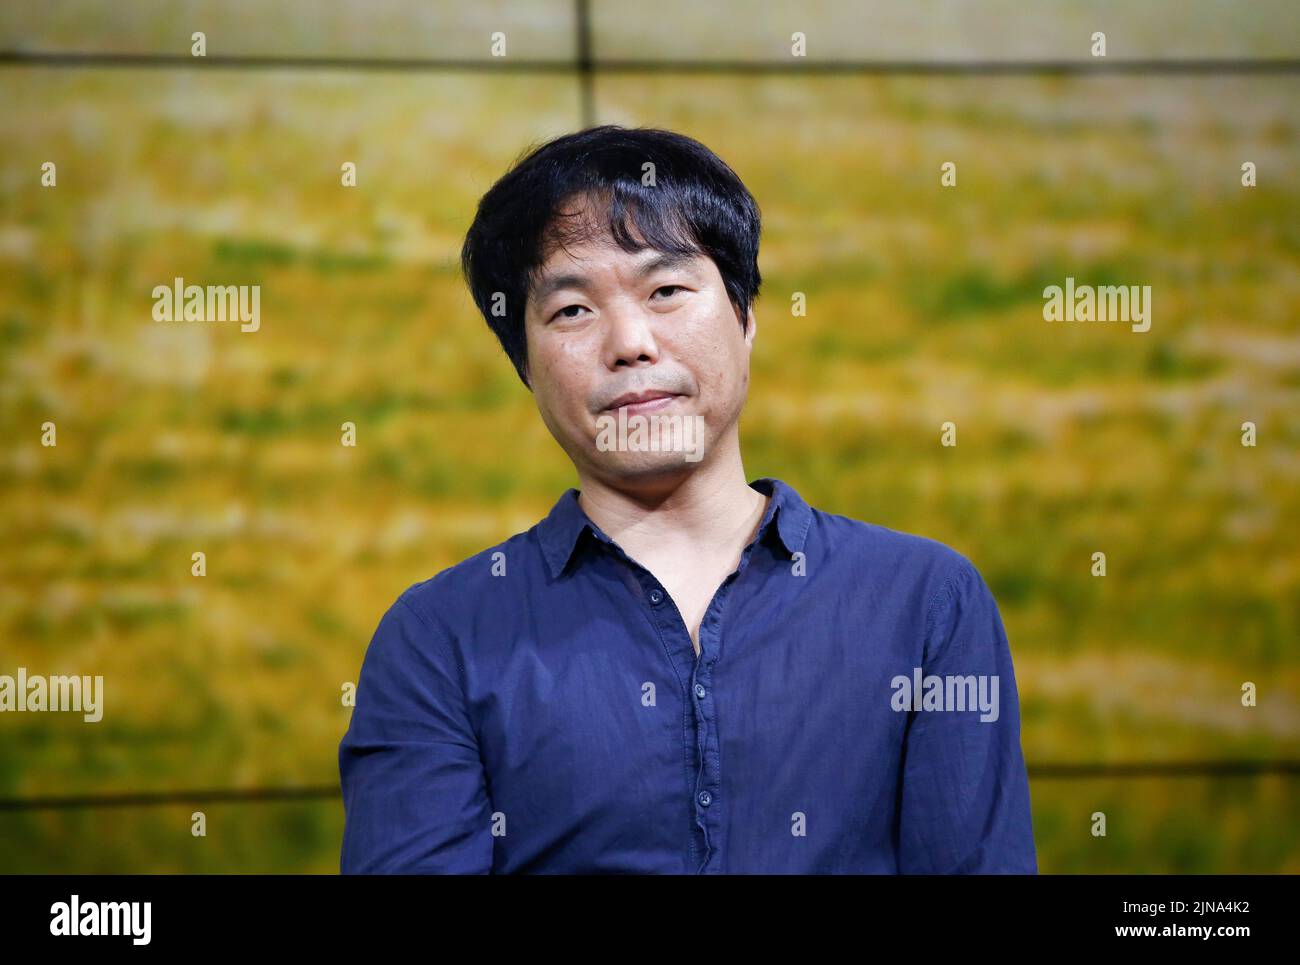 Kim Jin-Woo, August 9, 2022 : South Korean director Kim Jin-Woo attends a production press conference for upcoming Netflix original series 'A Model Family' in Seoul, South Korea. Credit: Lee Jae-Won/AFLO/Alamy Live News Stock Photo